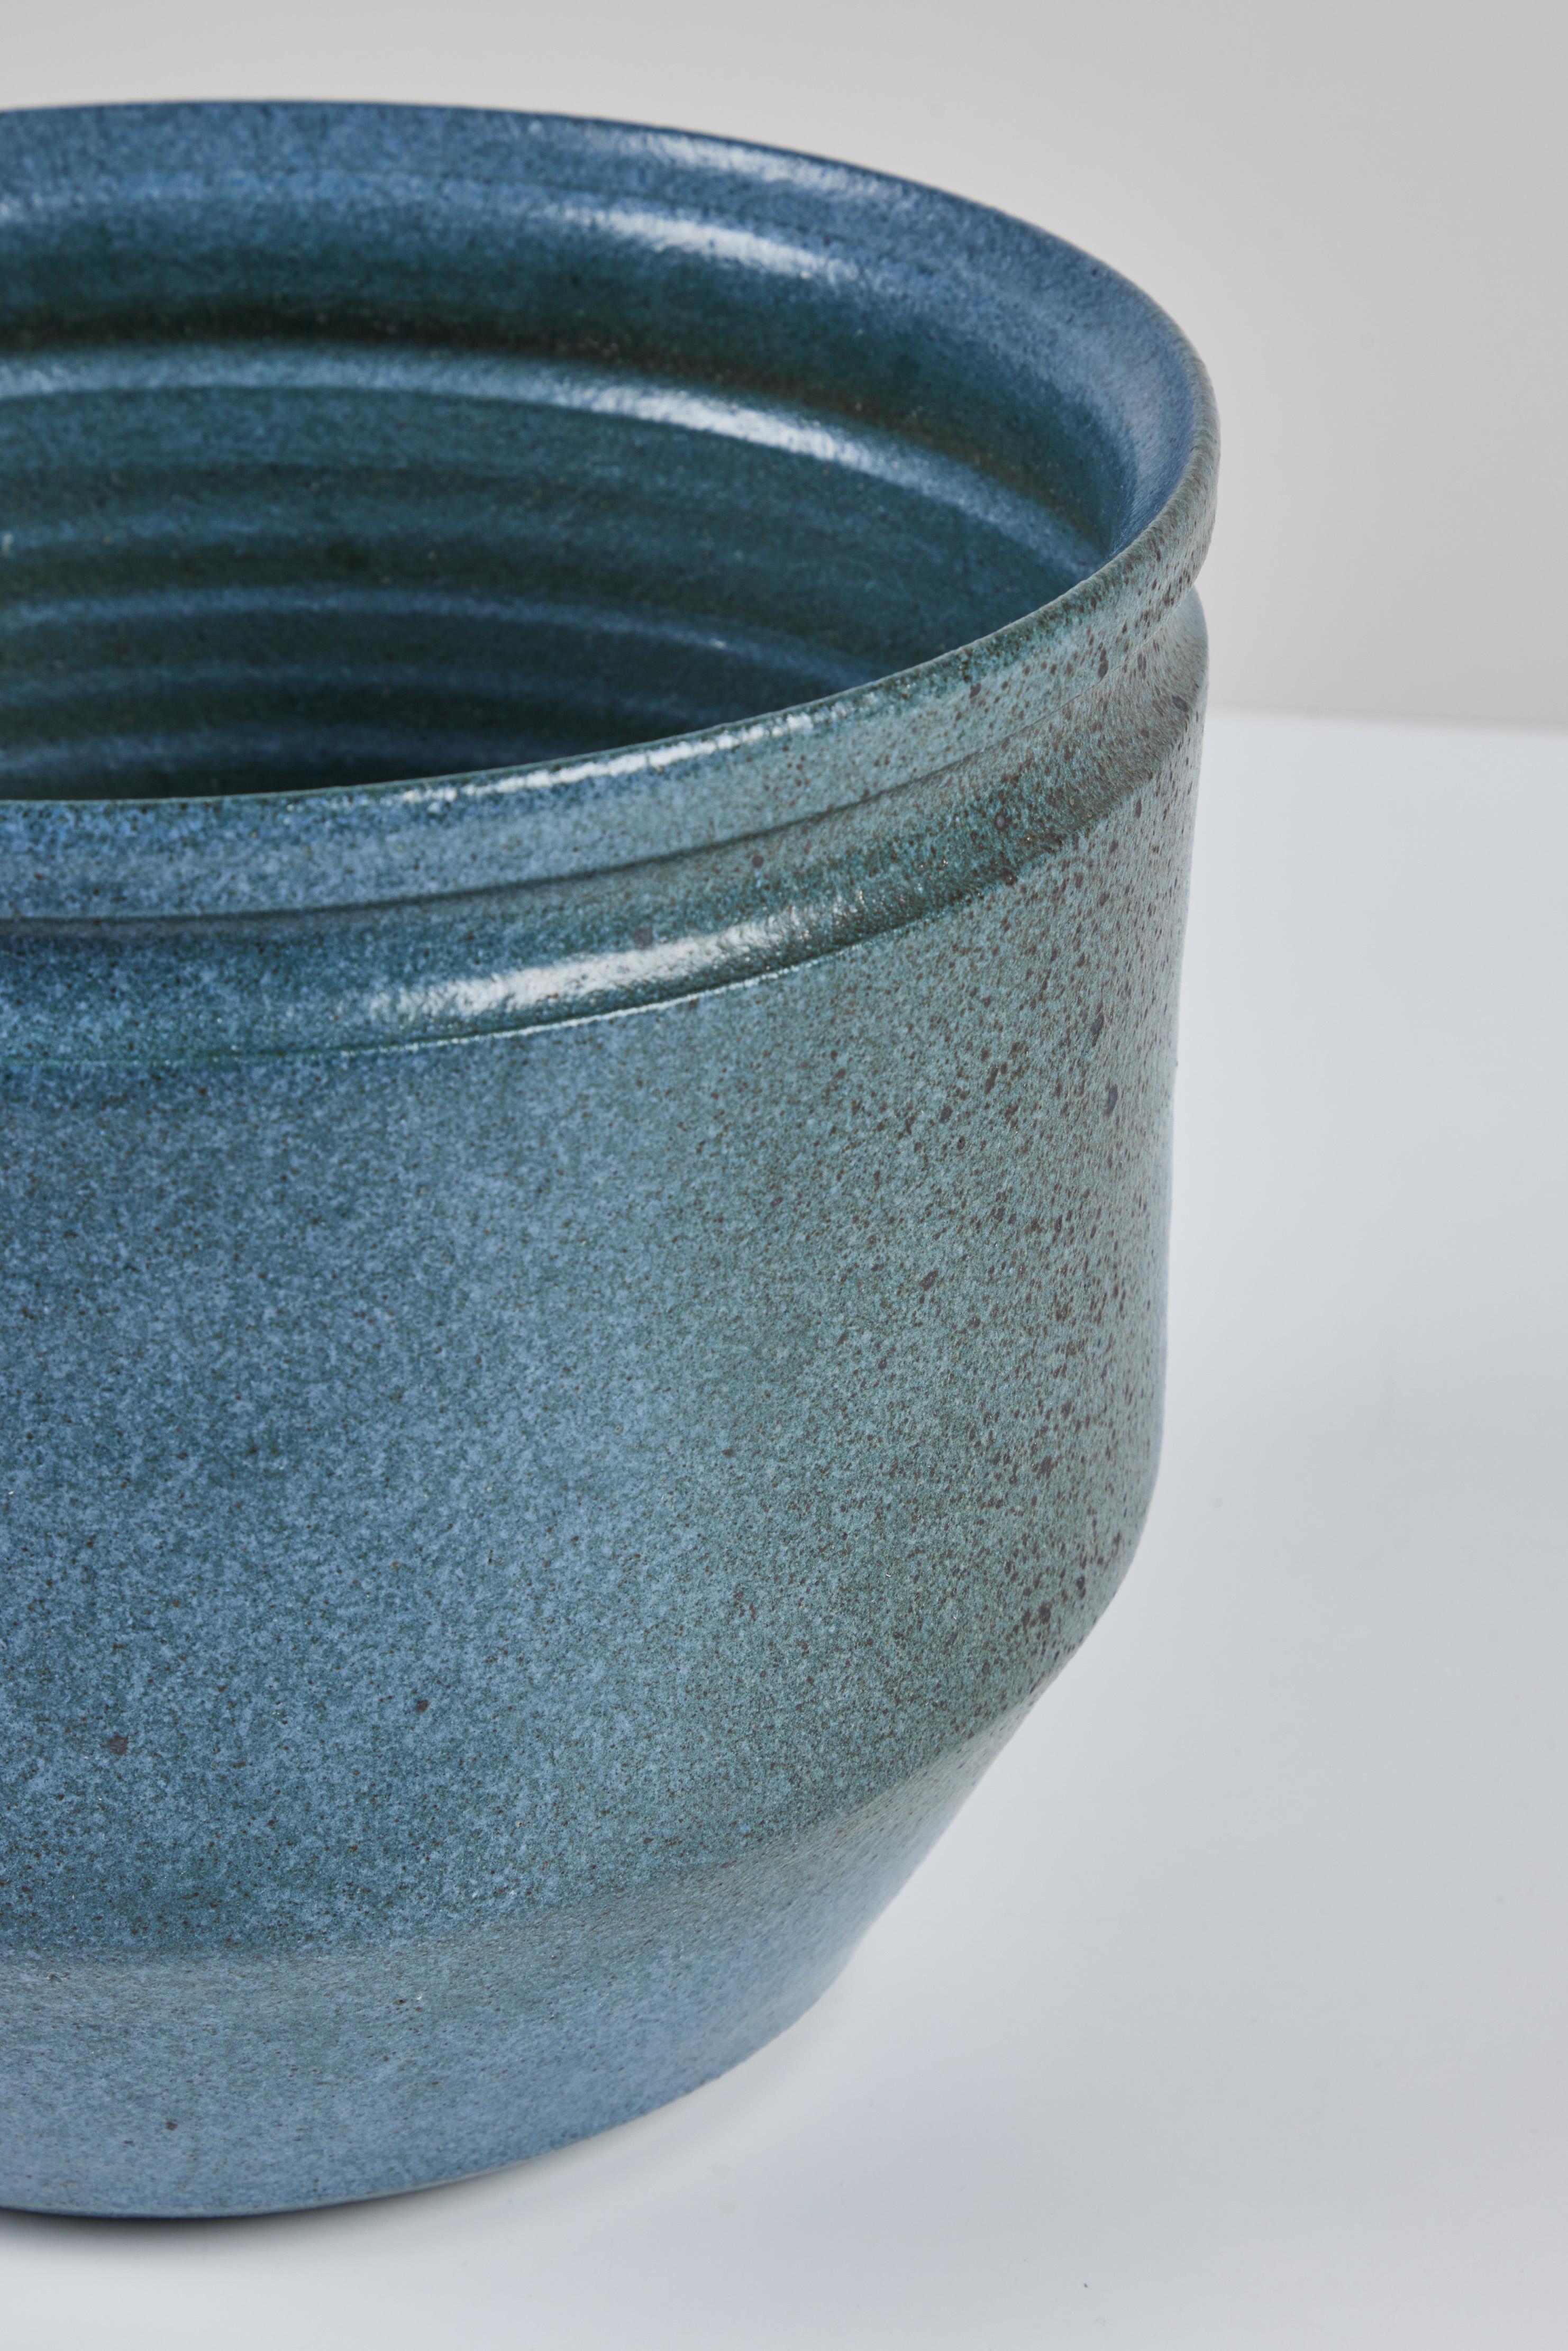 David Cressey and Robert Maxwell Blue Speckle Glazed Planter for Earthgender 5